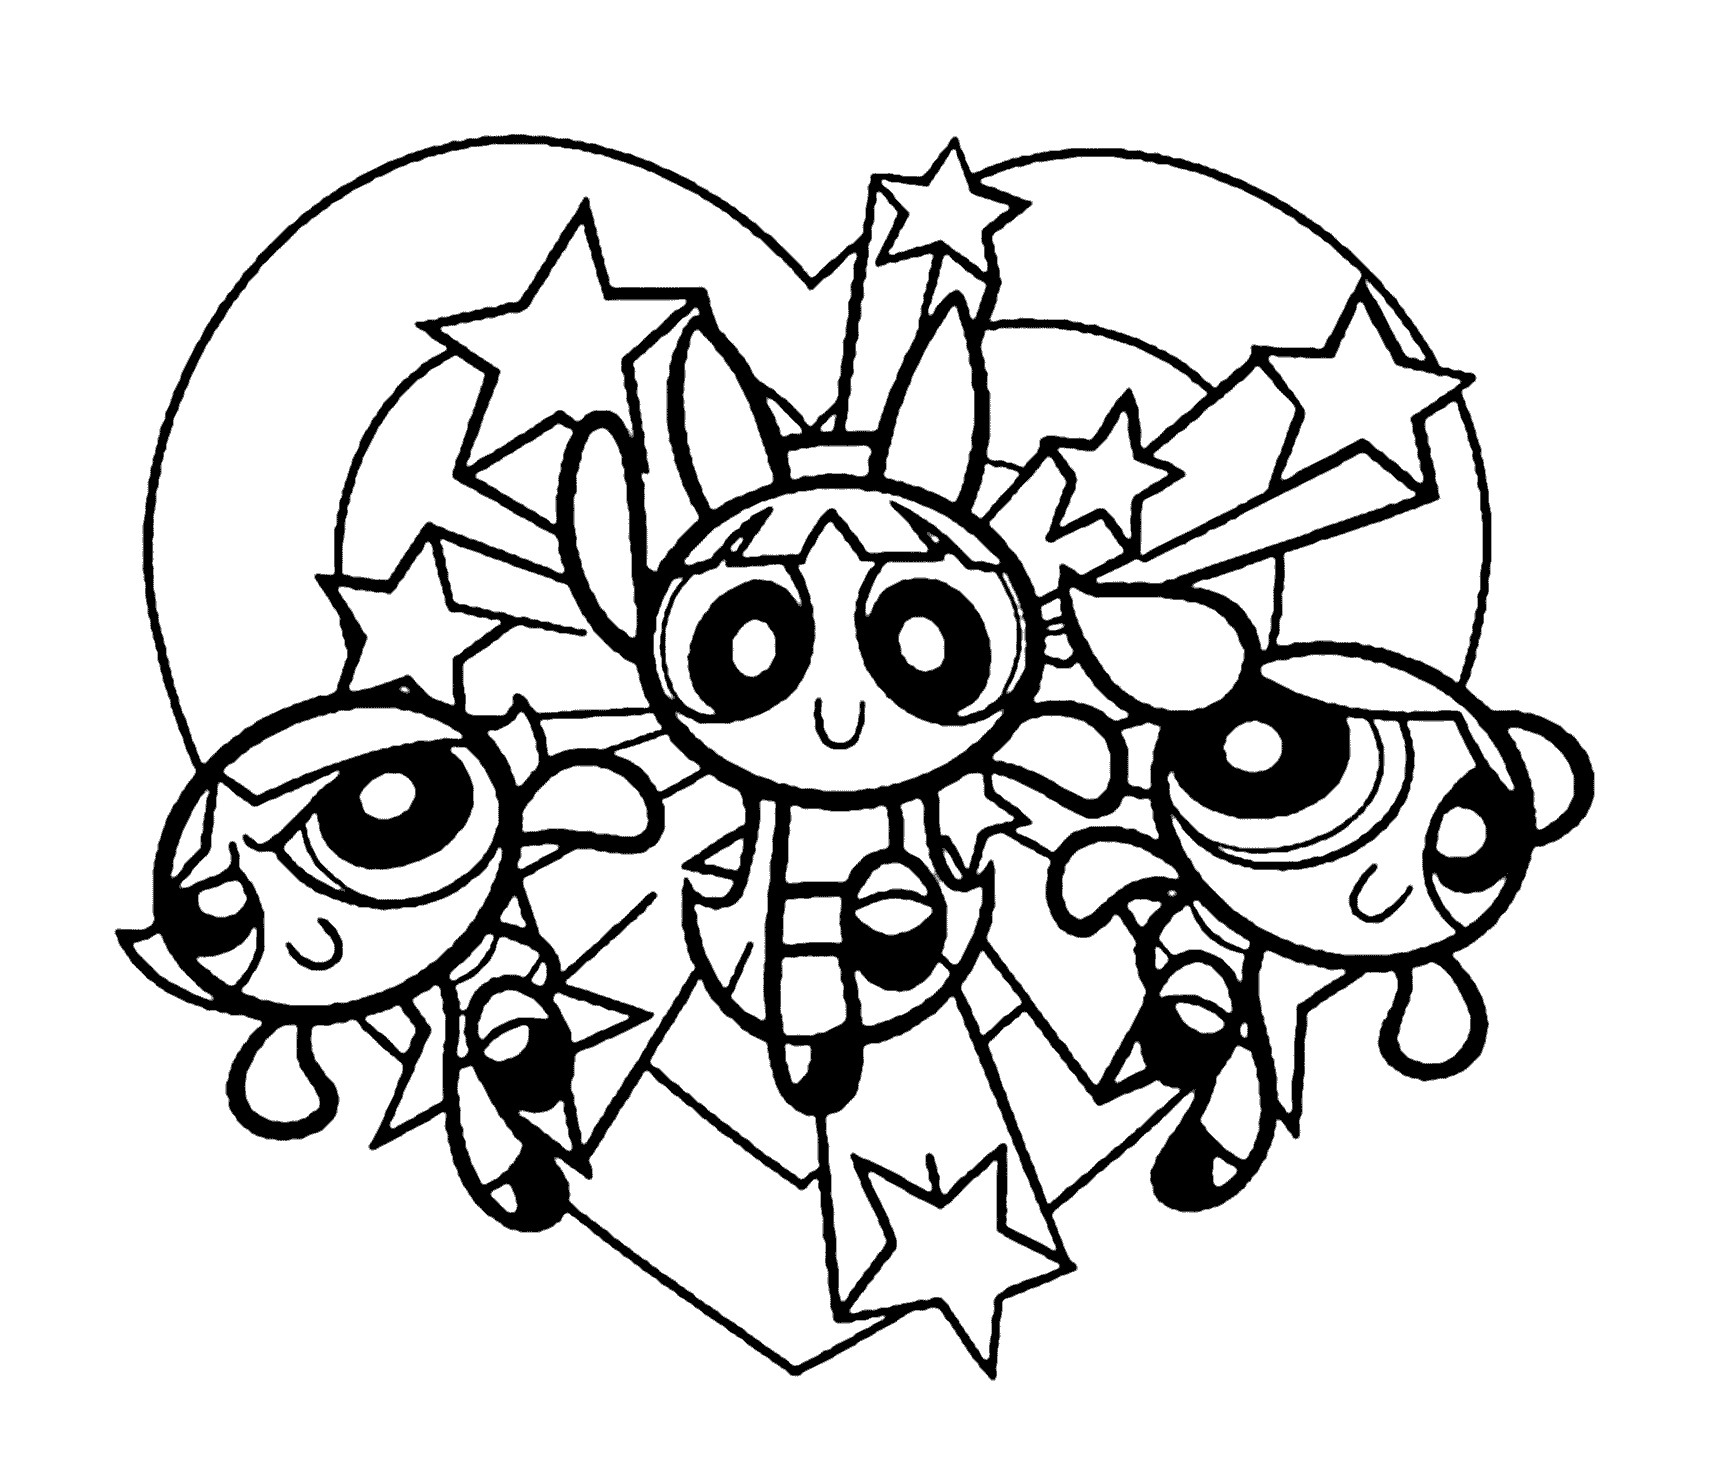 Power Puff Girls Coloring Pages
 Cool Powerpuff girls on vacation coloring pages for kids